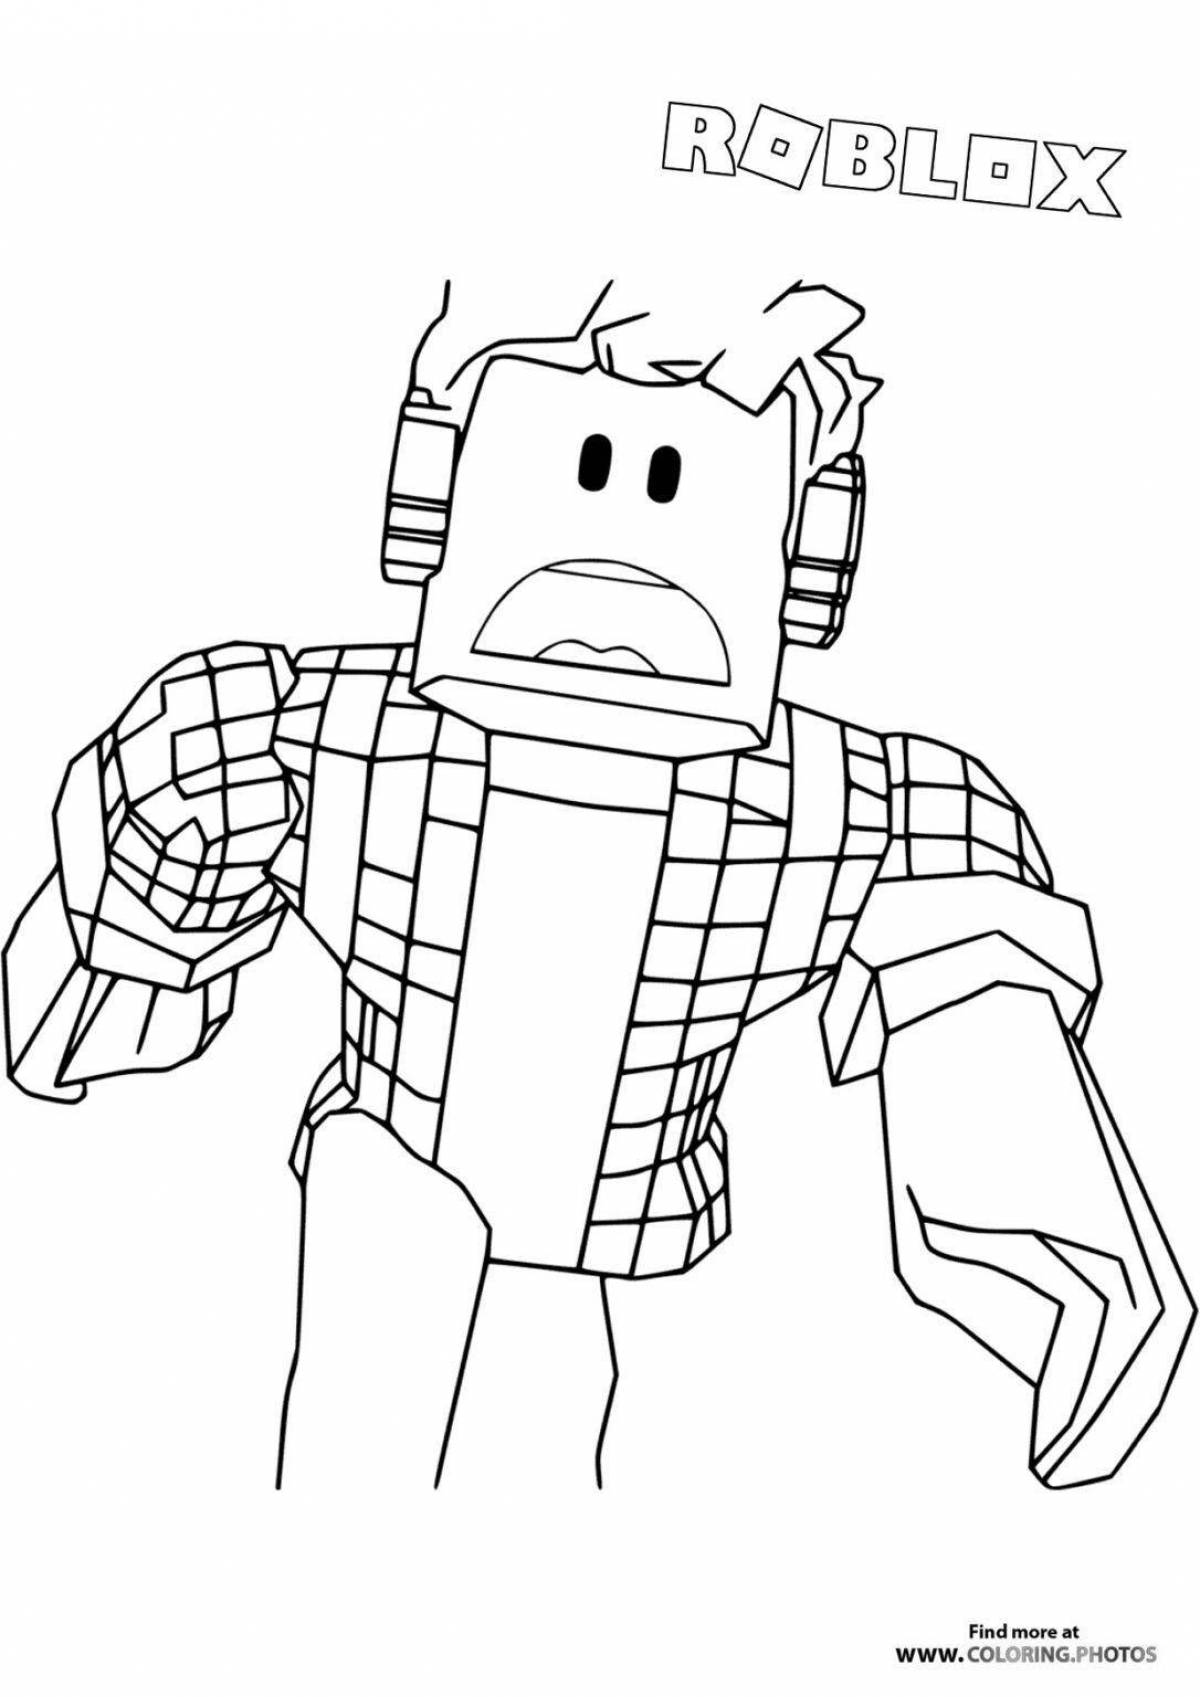 Roblox ler4eg bright coloring page